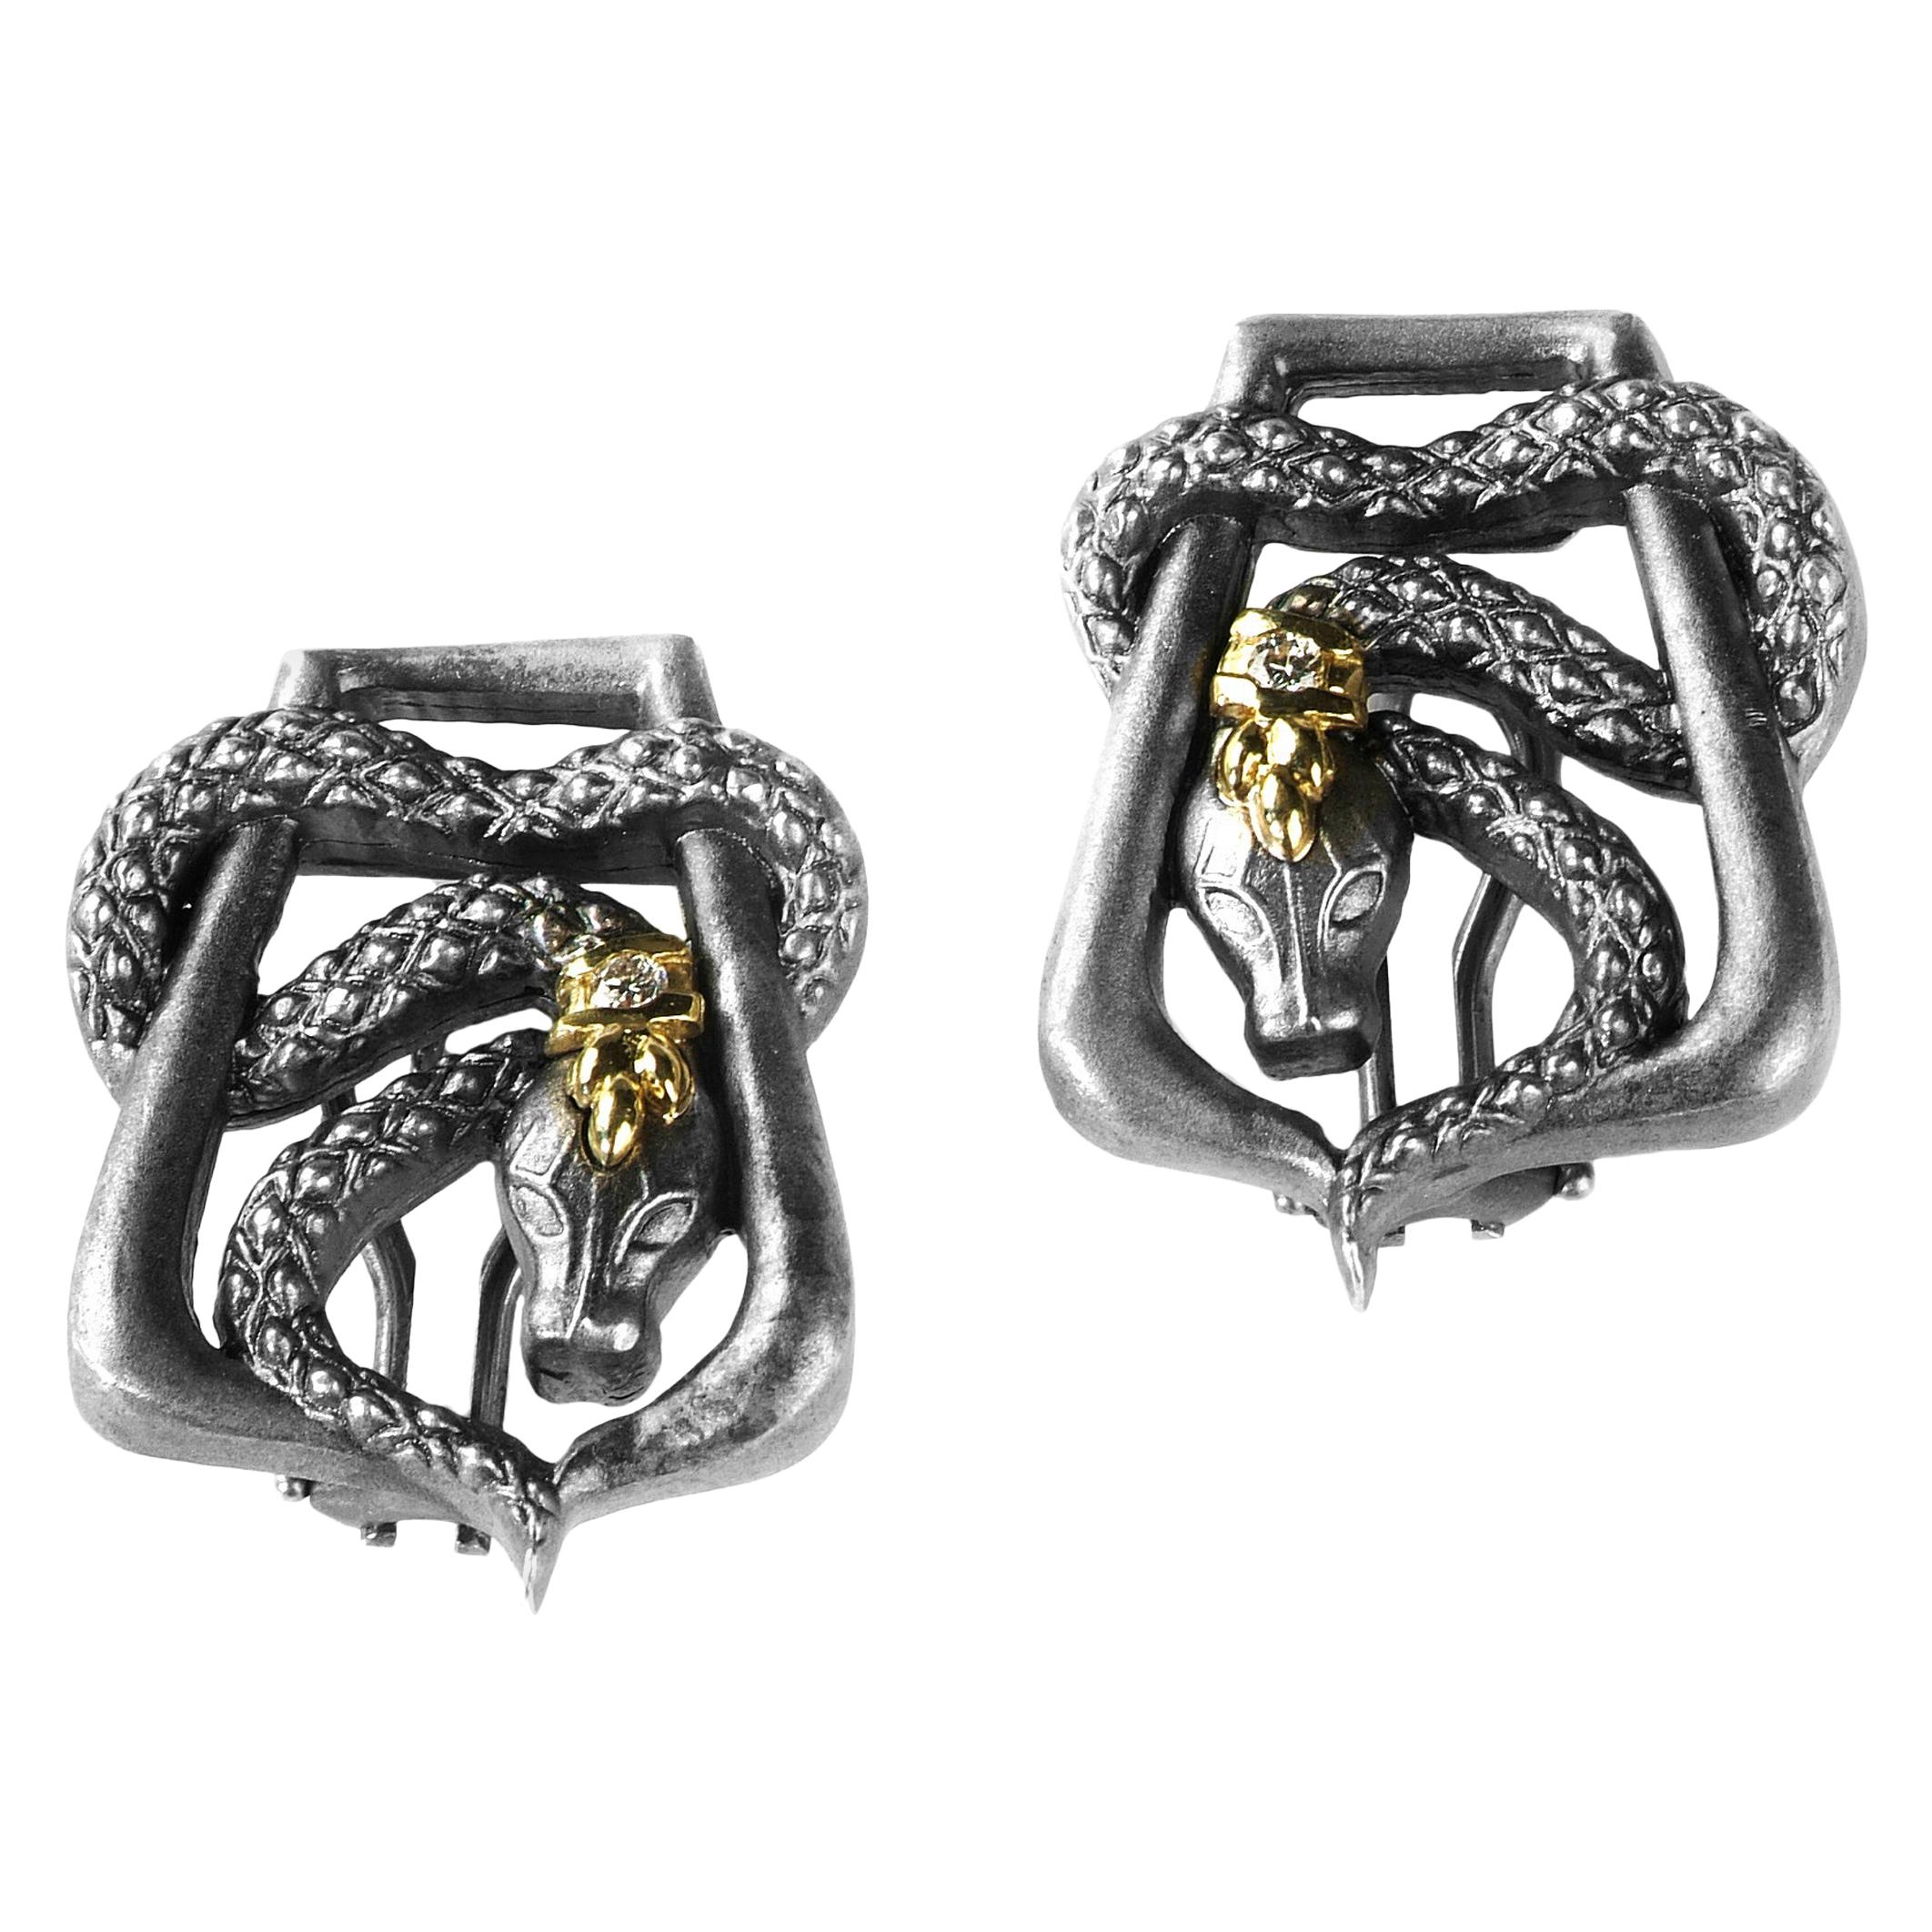 Stambolian Aged Silver and Gold Snake Cufflinks